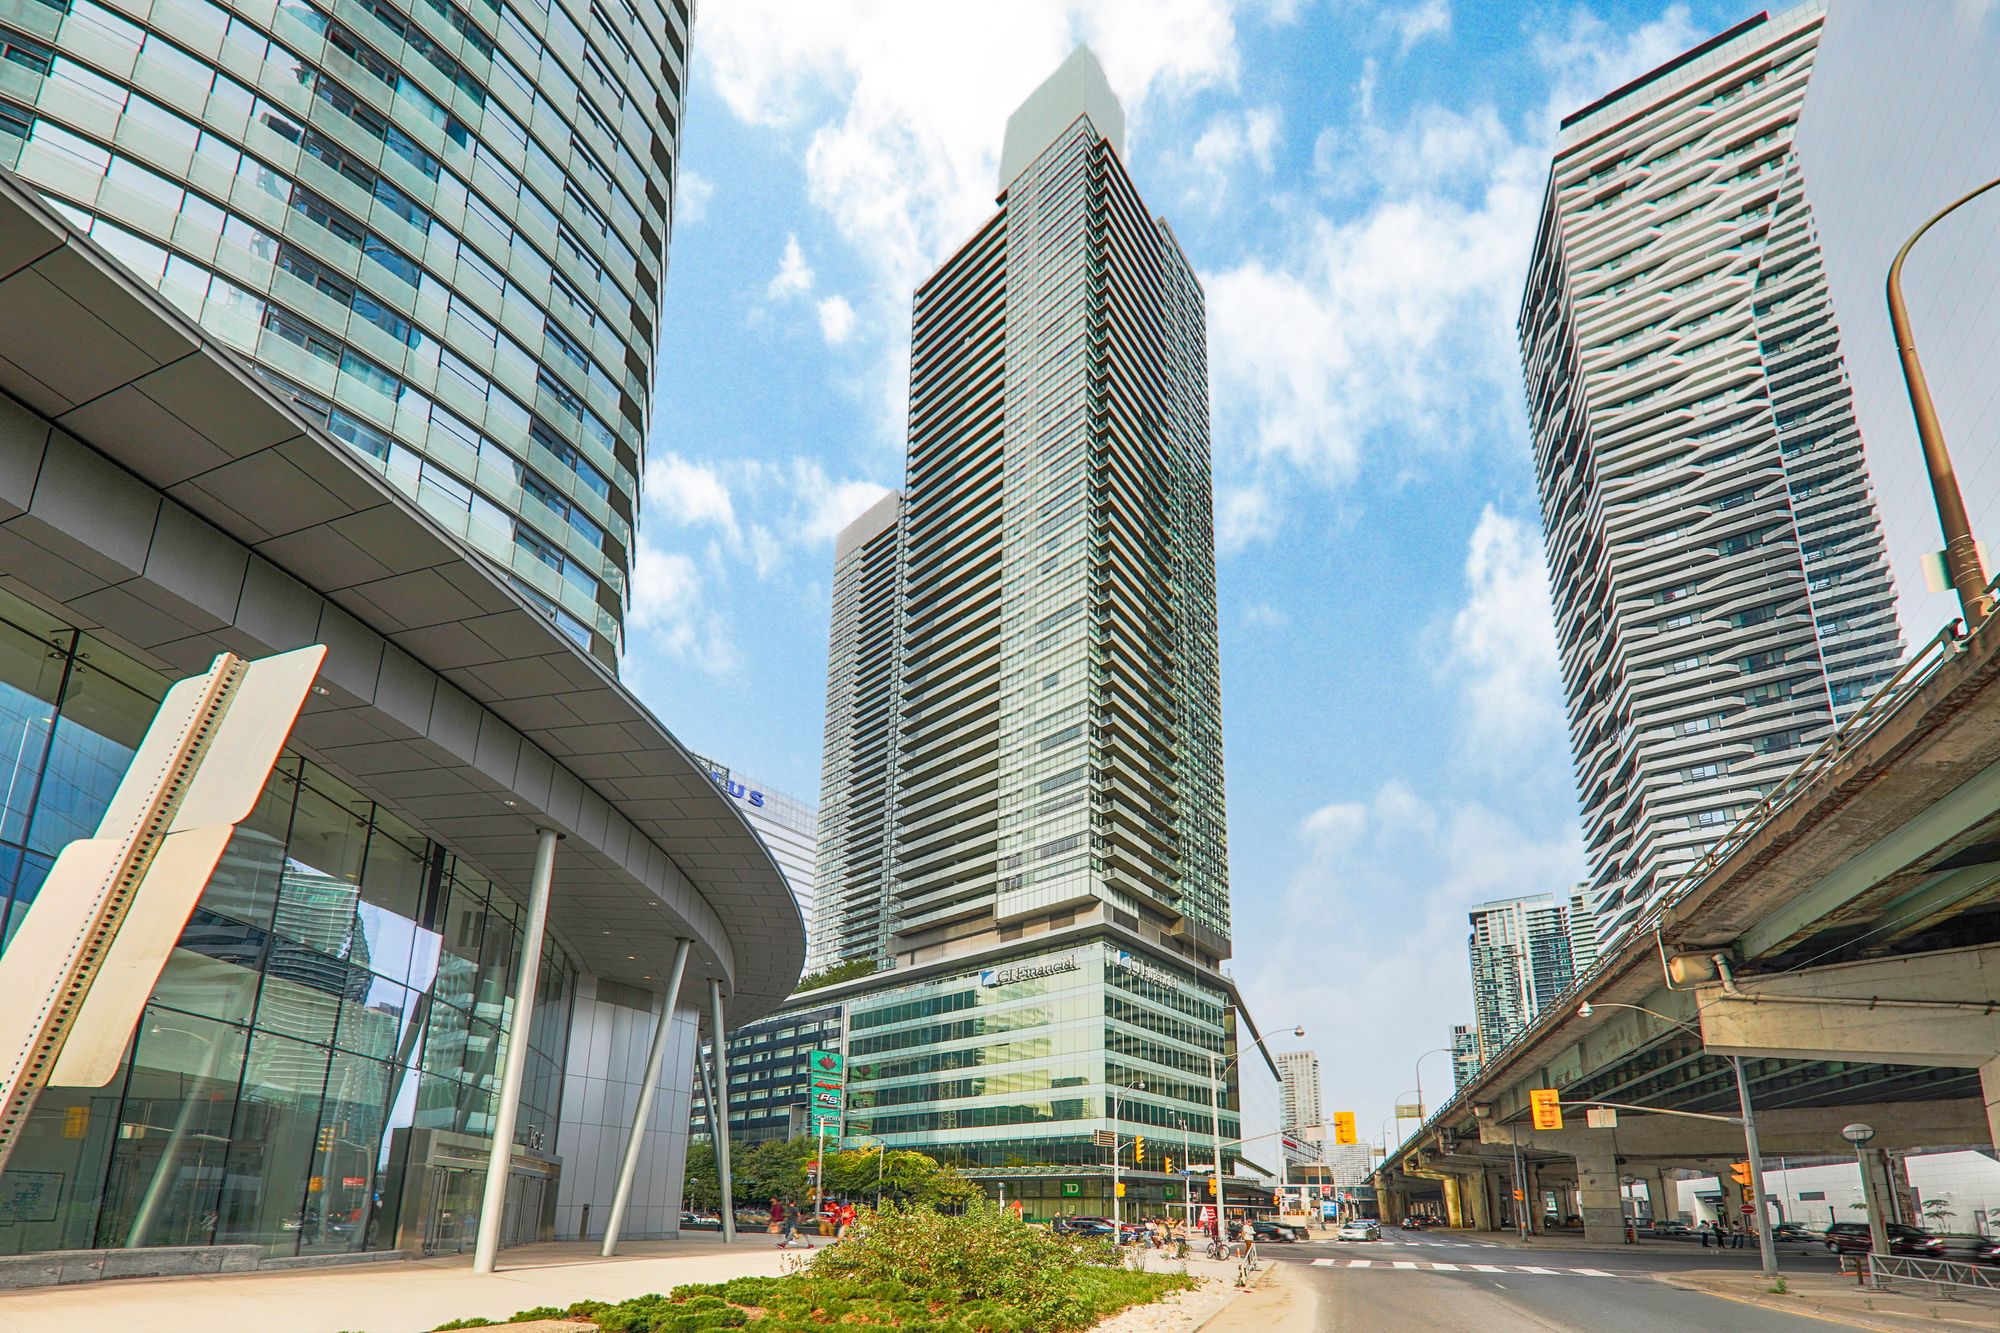 55 Bremner Blvd. This condo at Maple Leaf Square is located in  Downtown, Toronto - image #2 of 5 by Strata.ca